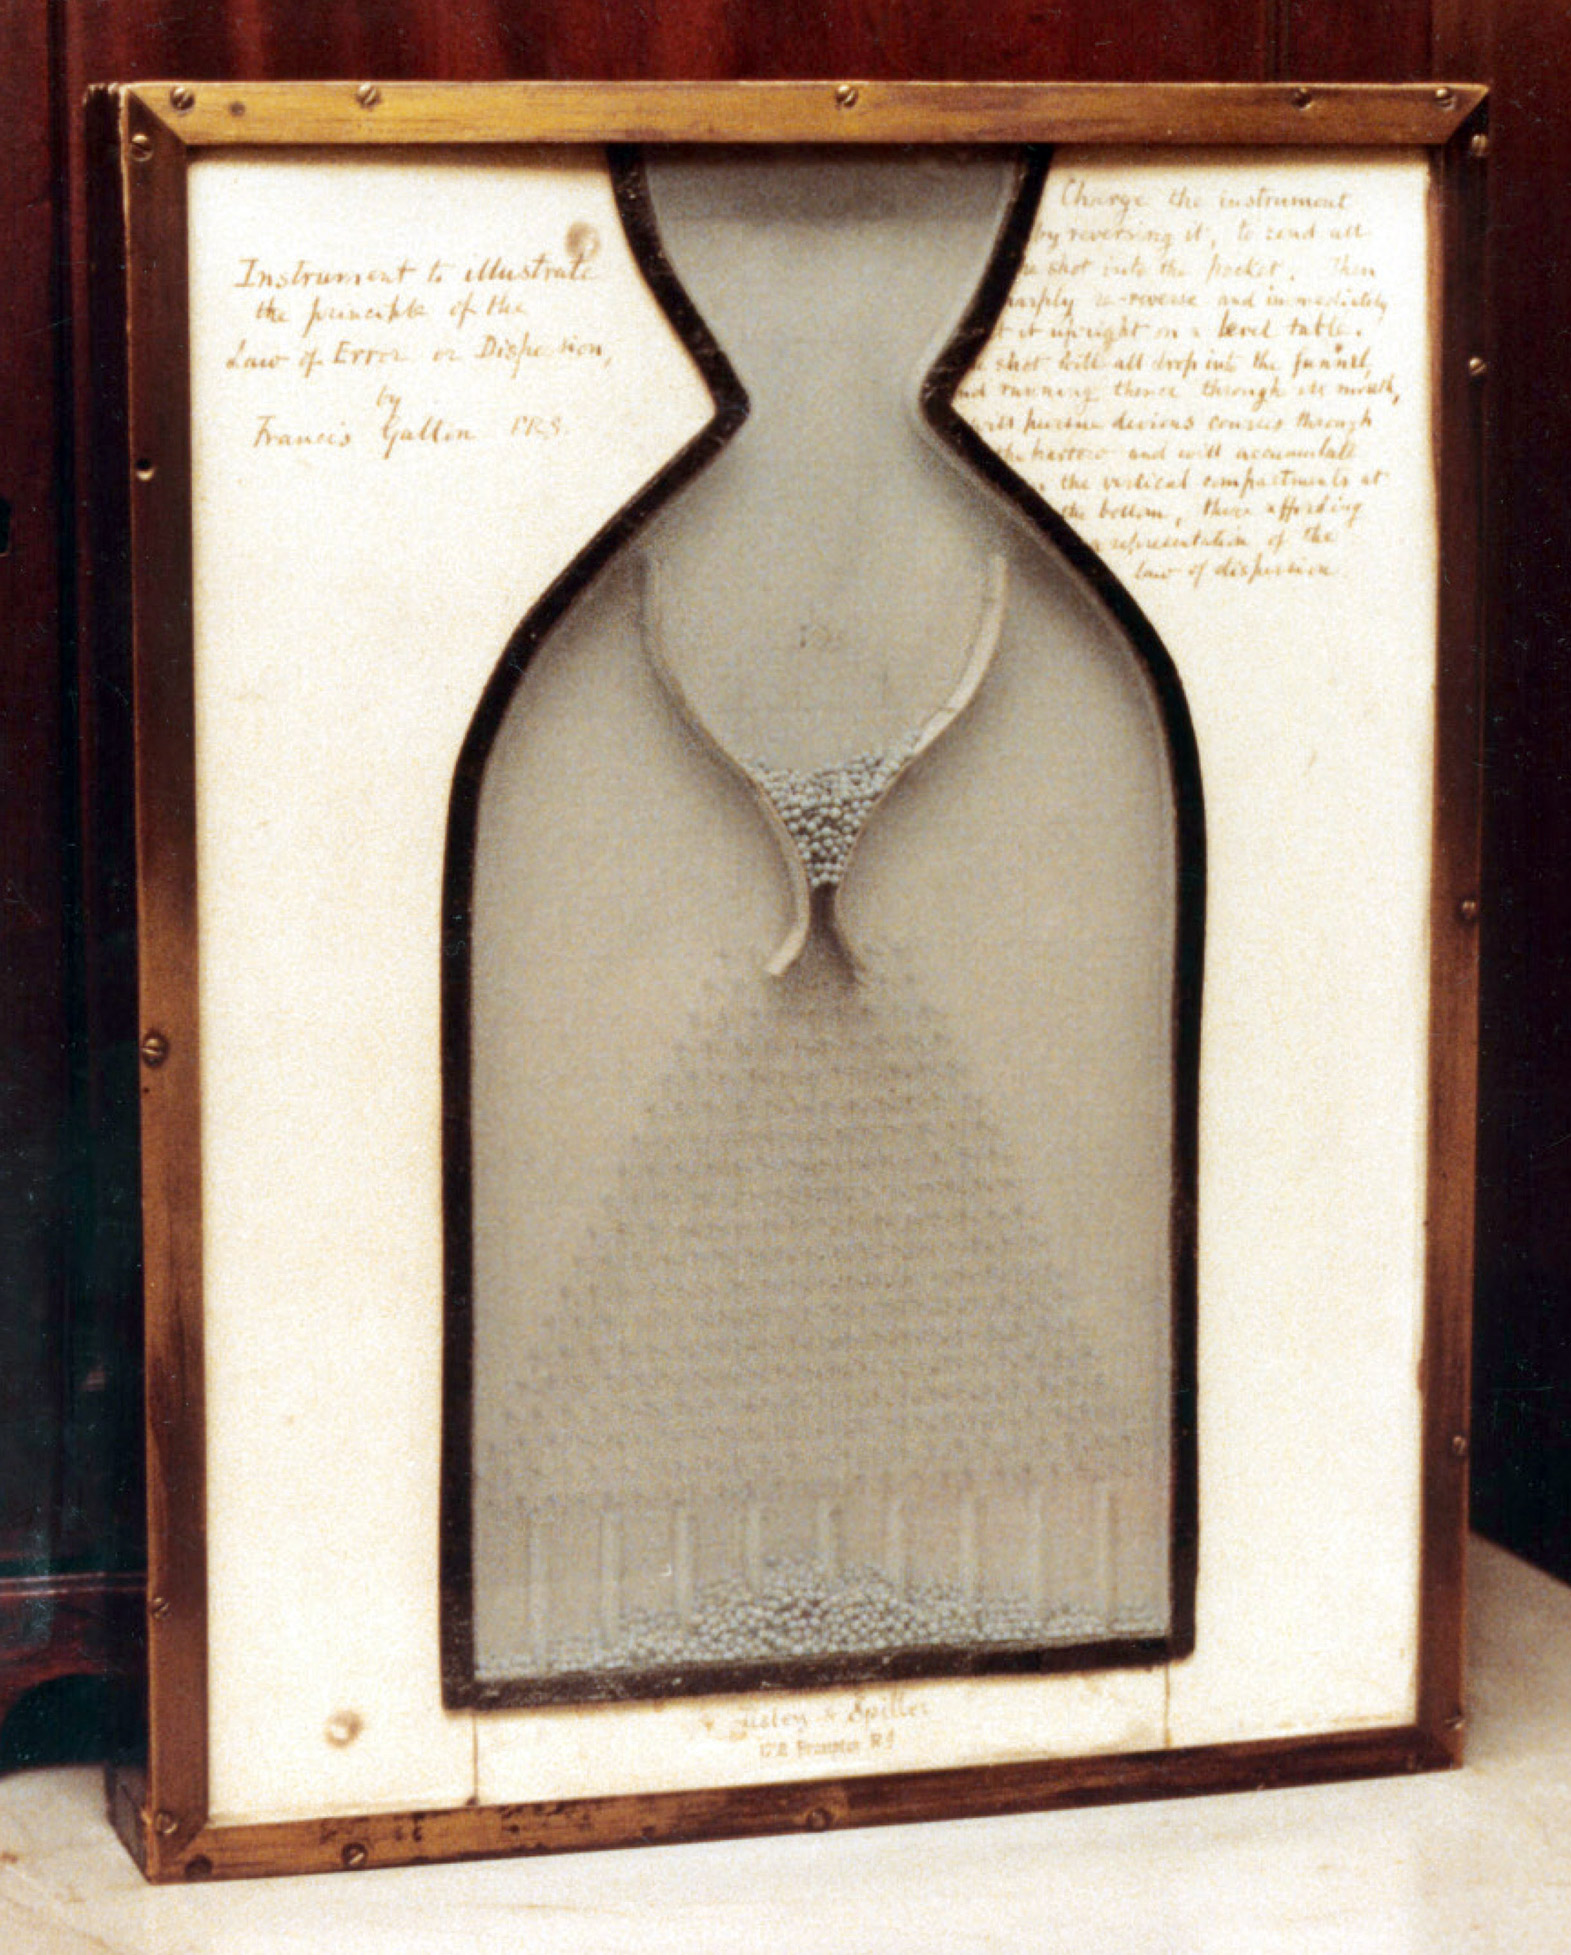 Galton Board on display at the Galton Laboratory, University College London. “Instrument to illustrate the principle of the Law of Error or Dispersion, by Francis Galton FRS.” Courtesy Stephen M. Stigler.